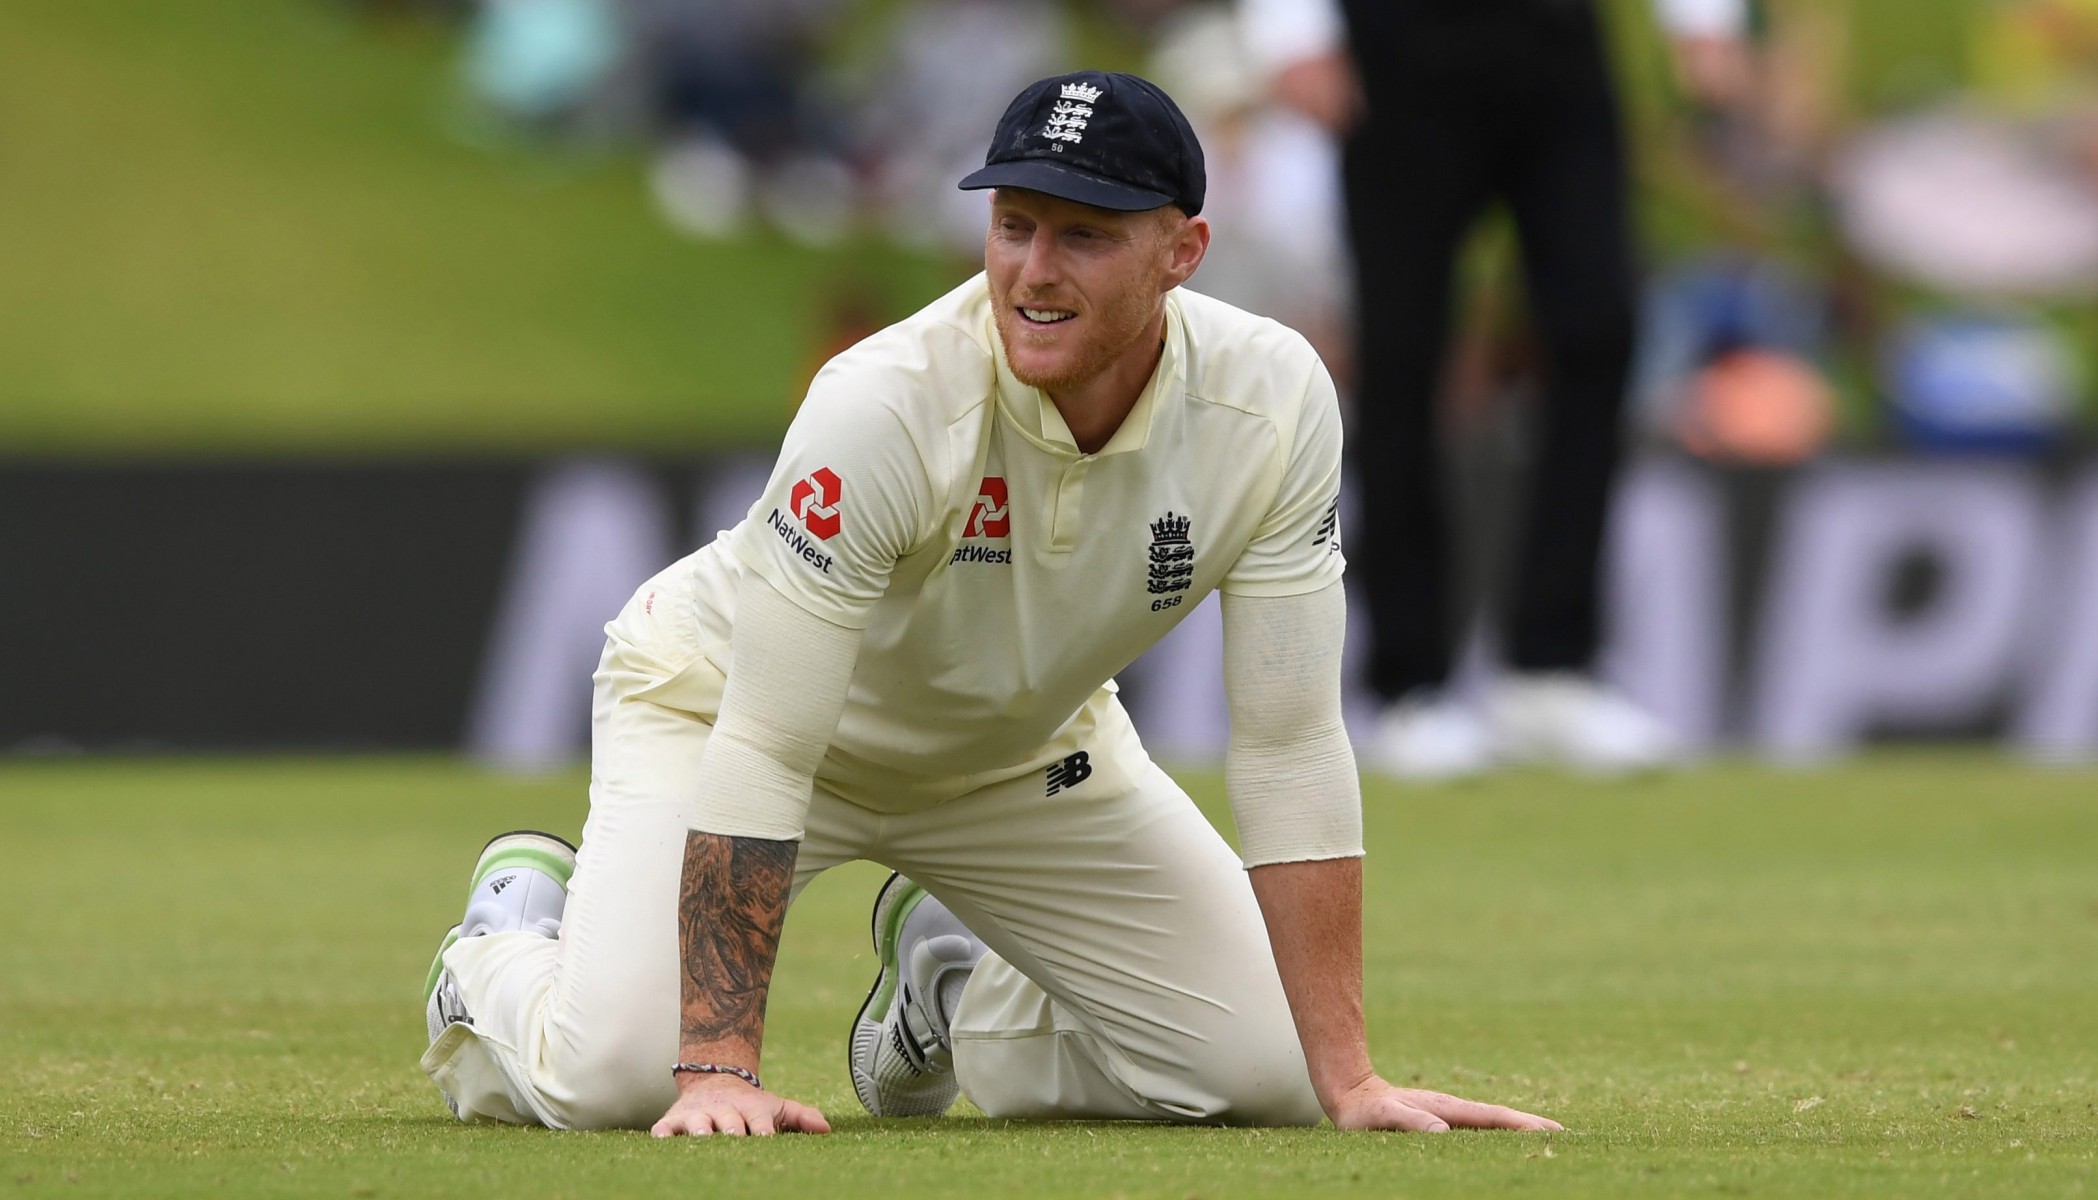 , England given massive 376 to win first test in South Africa as Joe Root hopes for spirit of Headingley